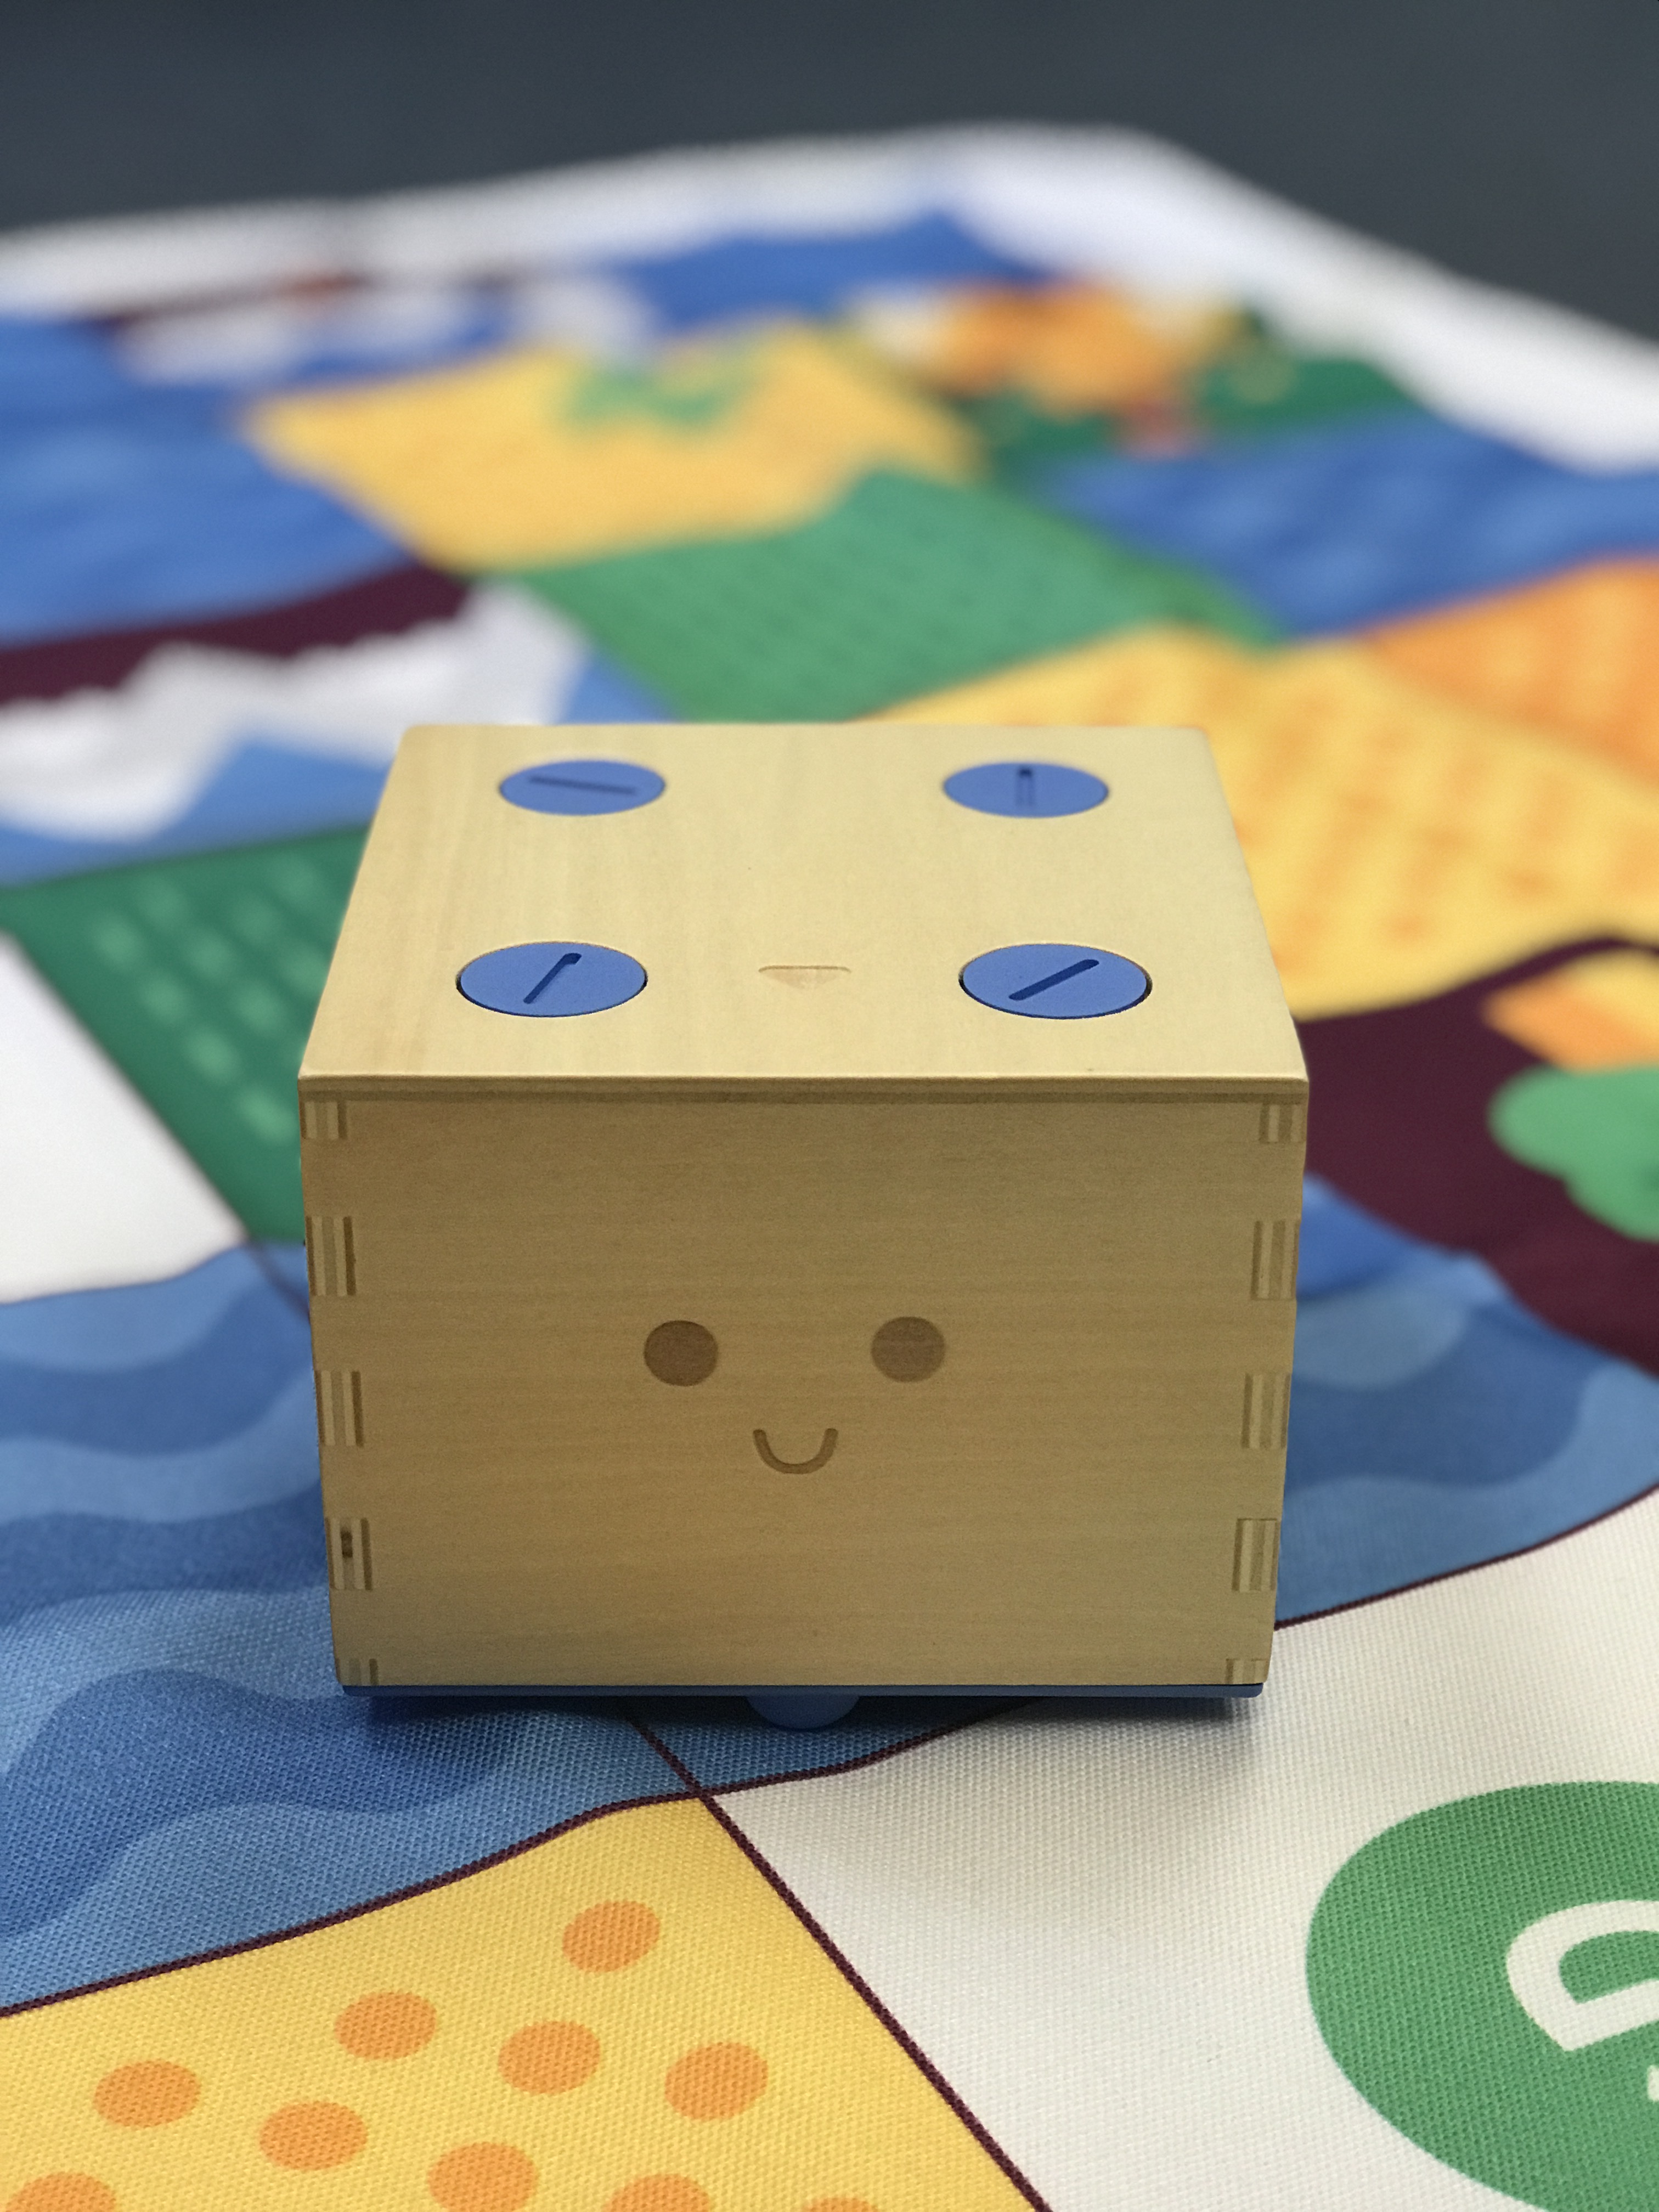 Hands-on coding with Cubetto the robot